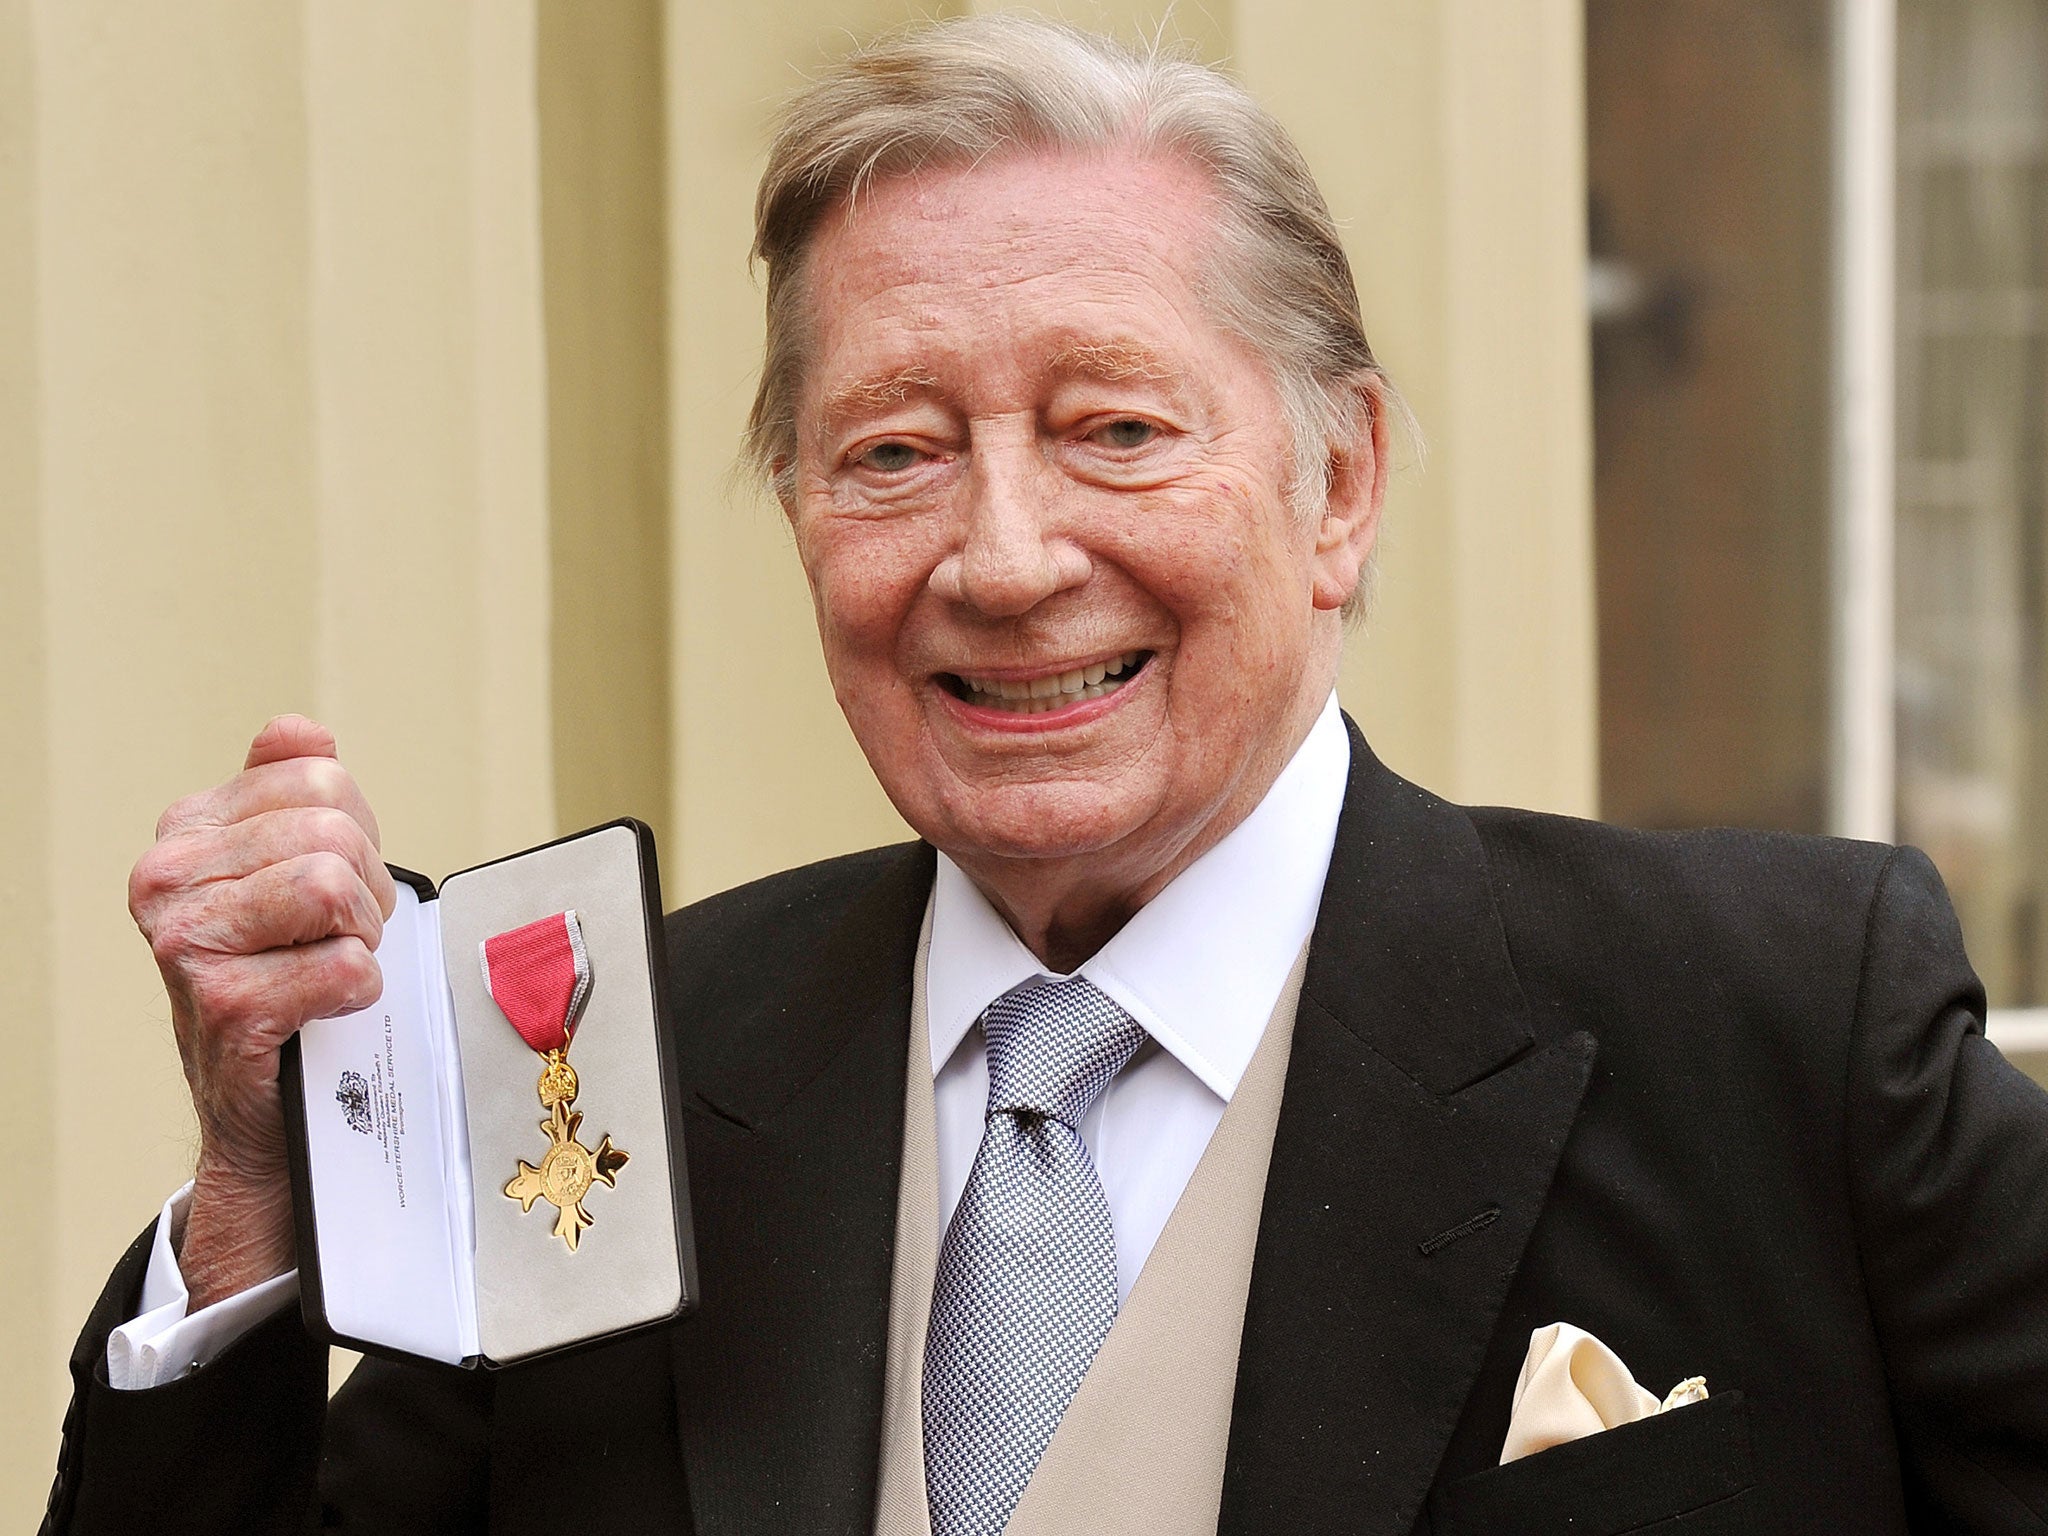 Lloyd in 2012 after receiving hs OBE for services to comedy